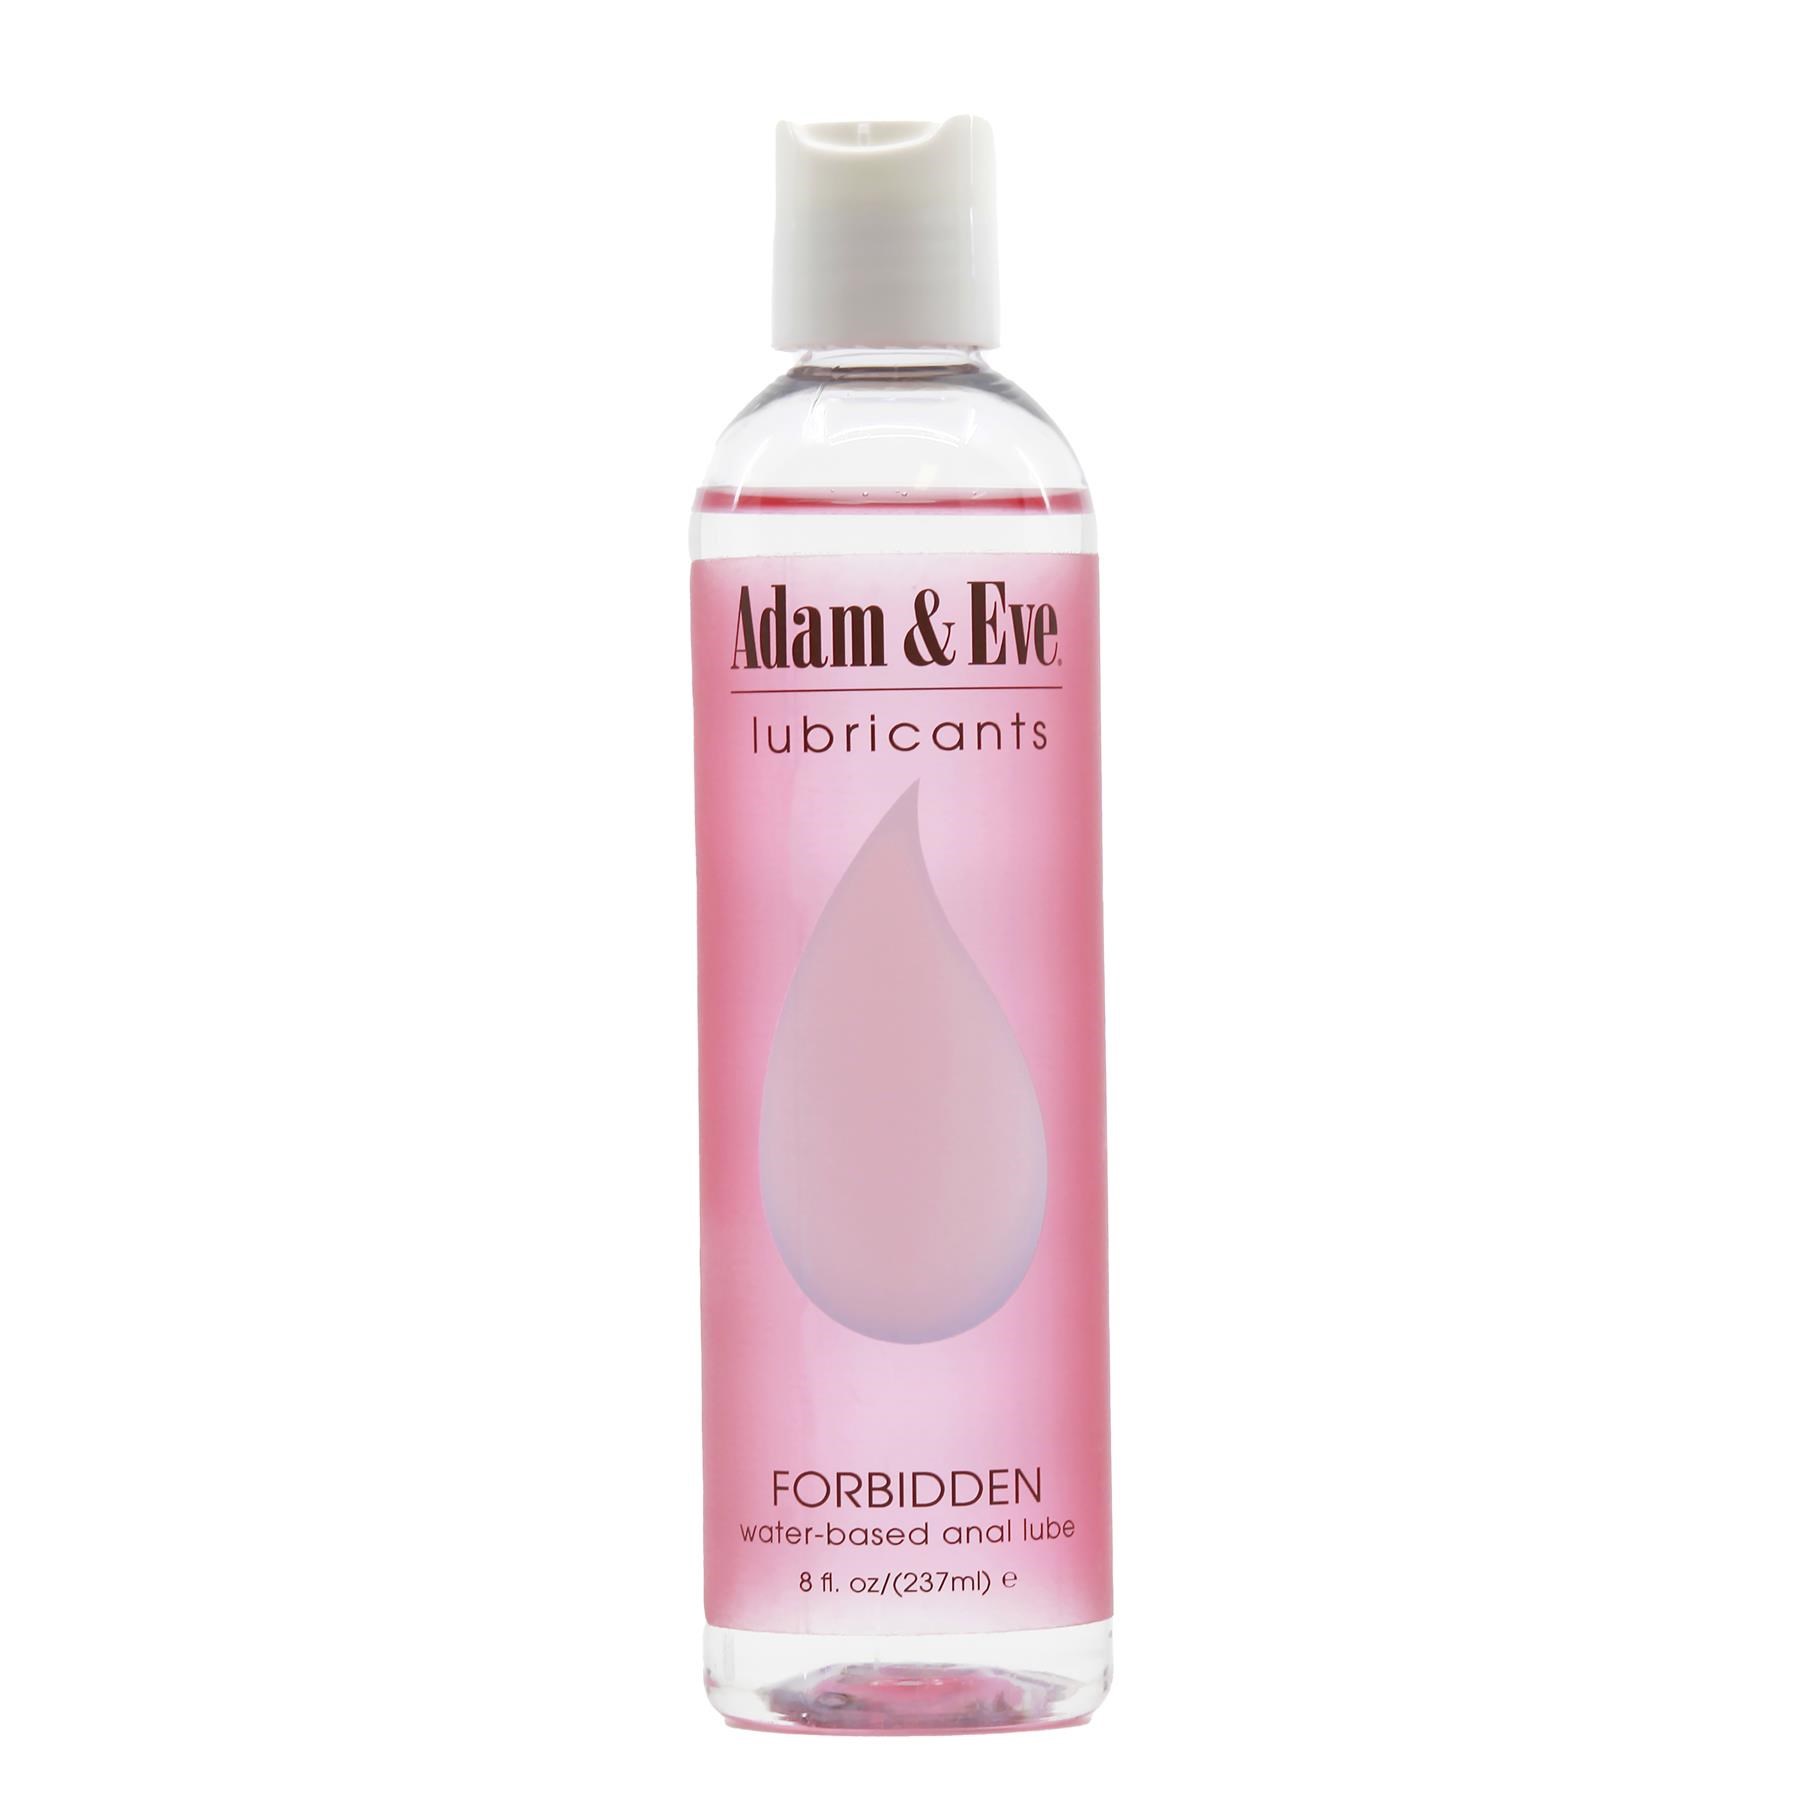 Adam & Eve Forbidden Anal Lubricant 8 oz front of bottle